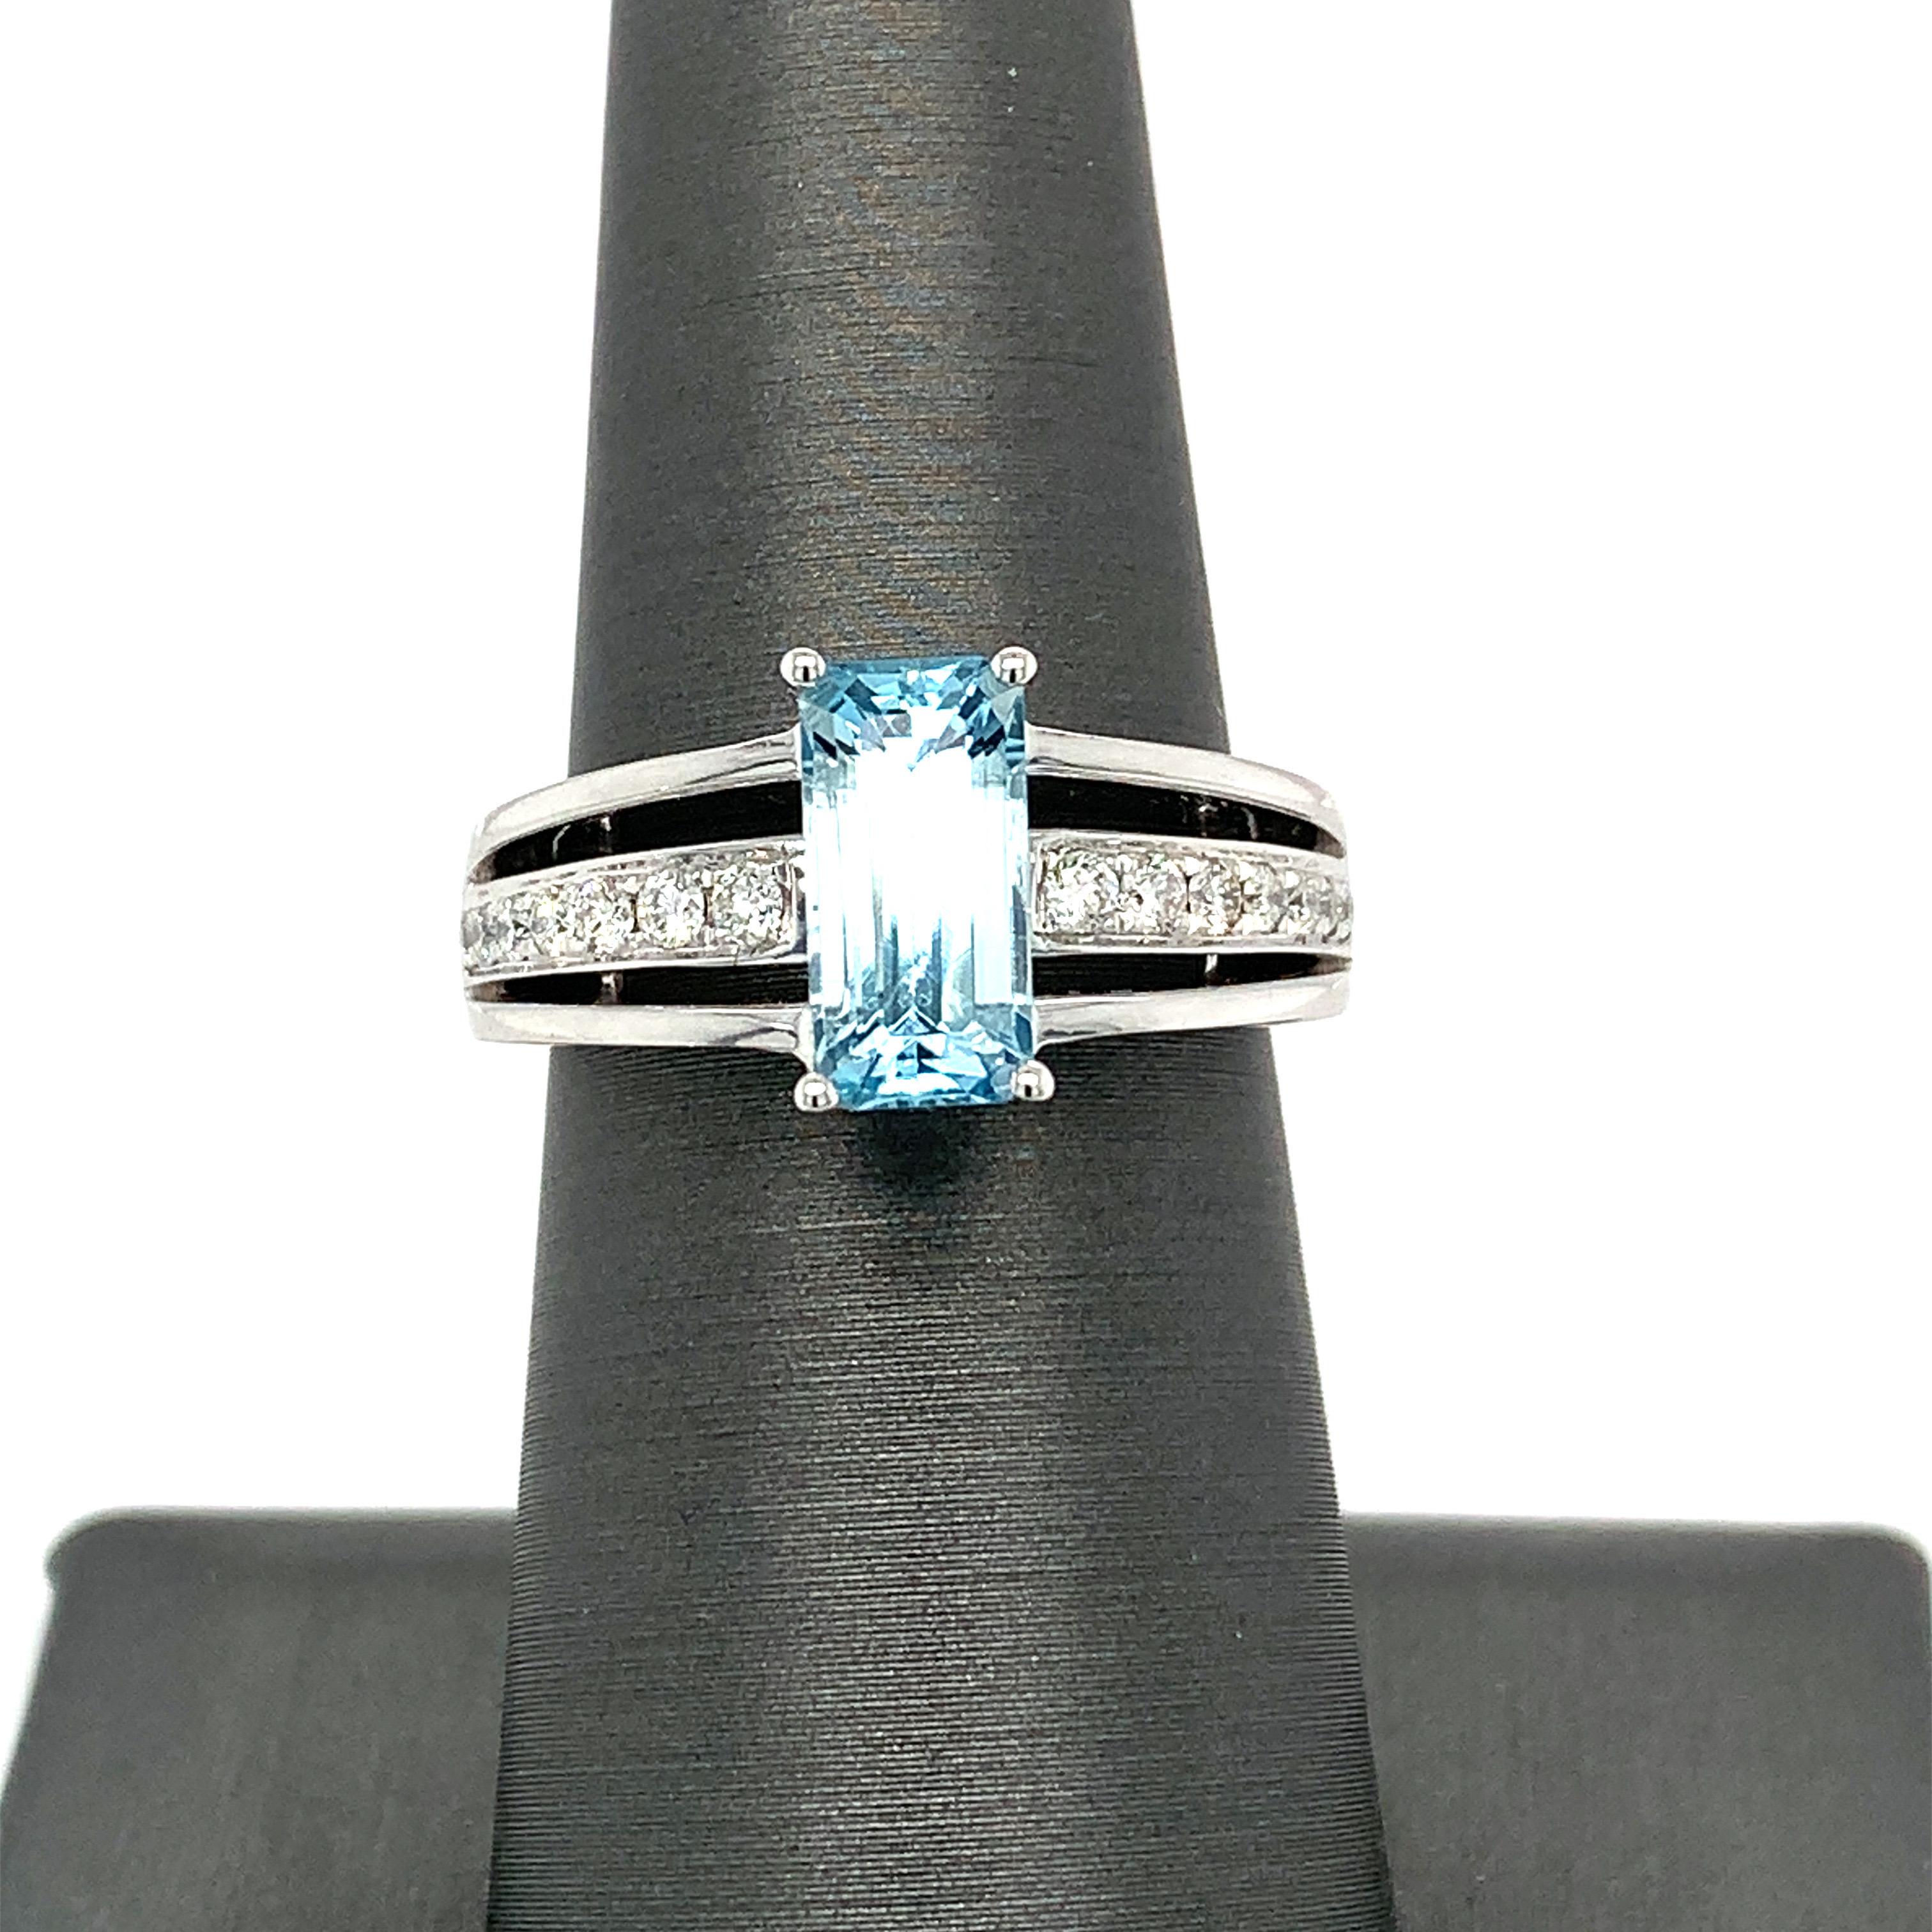 1.8 carat emerald cut aquamarine ring has accents of diamonds on band to elevate its simple look. Center stone aquamarine is set with four prongs and has beautiful under gallery. Hand made by artisan and set in 14K white gold, this ring is perfect